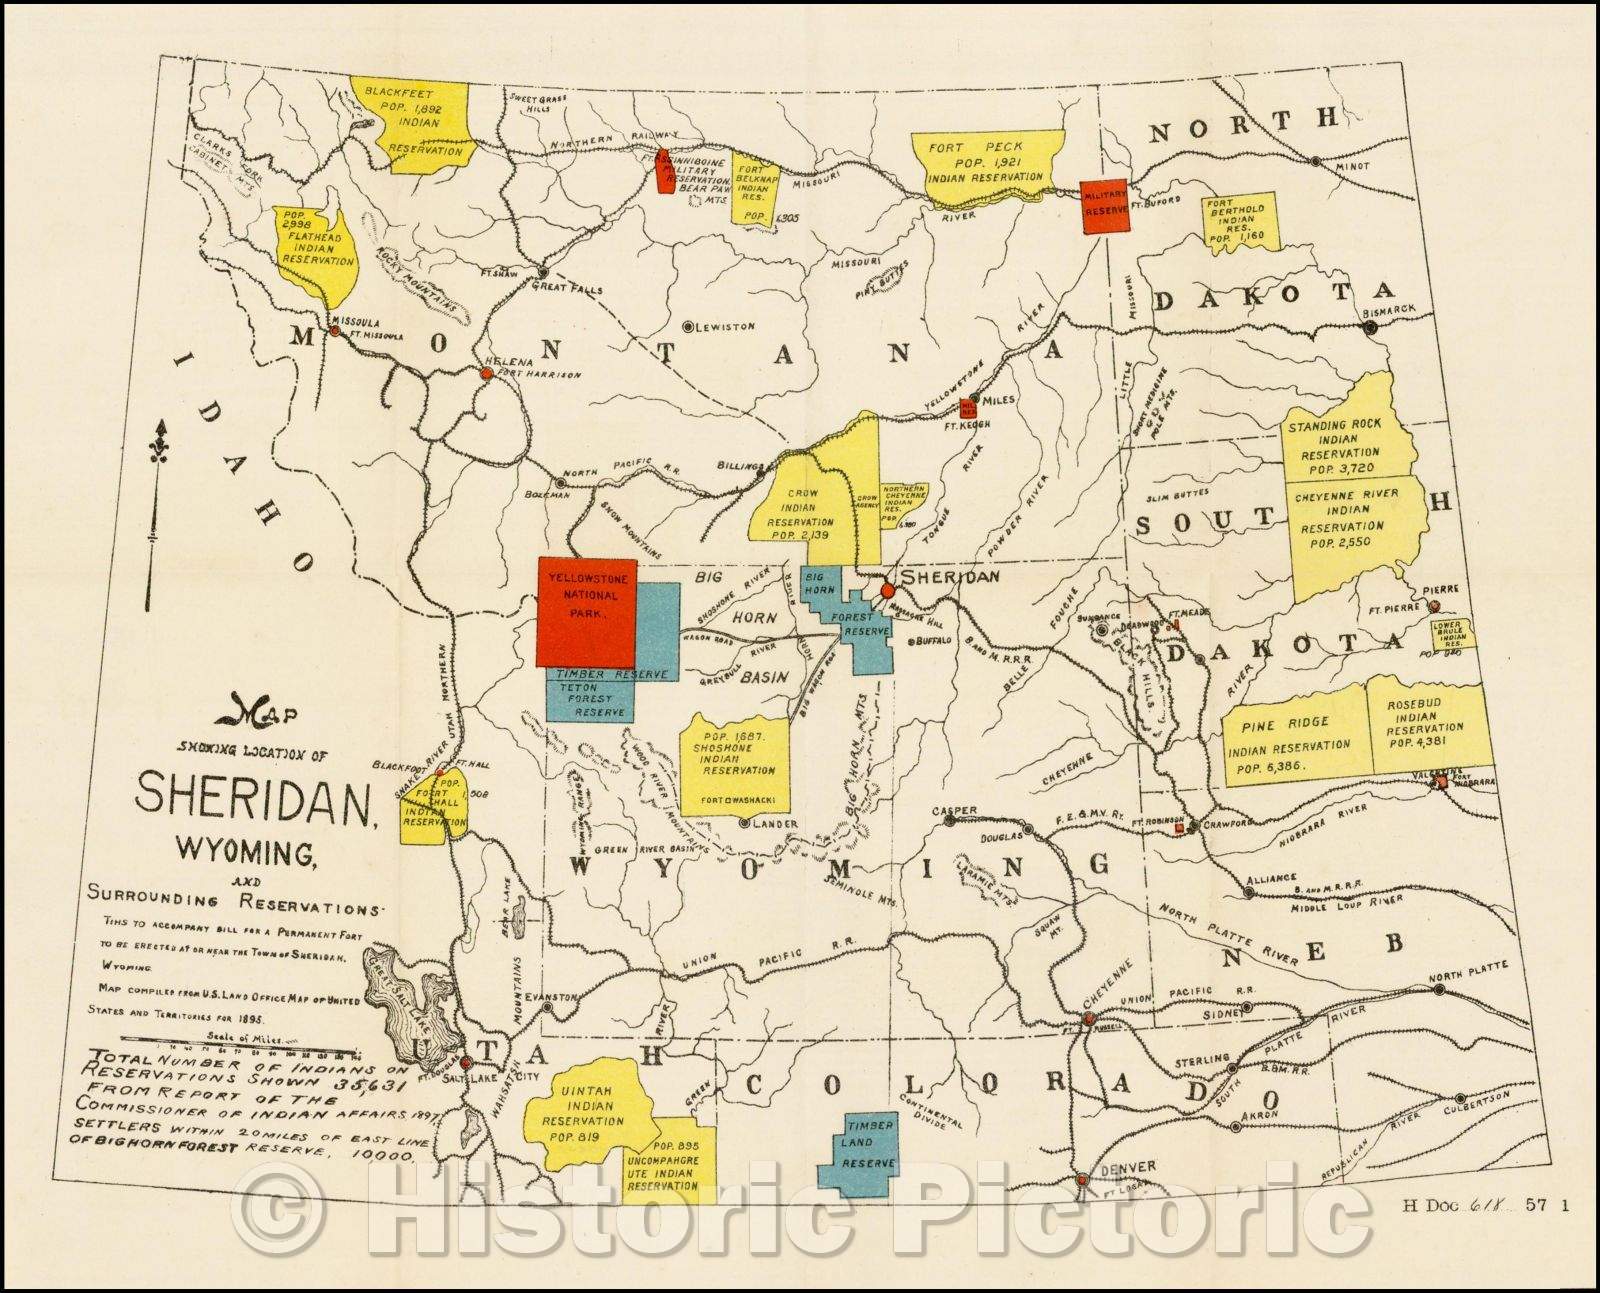 Historic Map - Map Showing Location of Sheridan, Wyoming and Surrounding Reservations, 1898, United States GPO - Vintage Wall Art